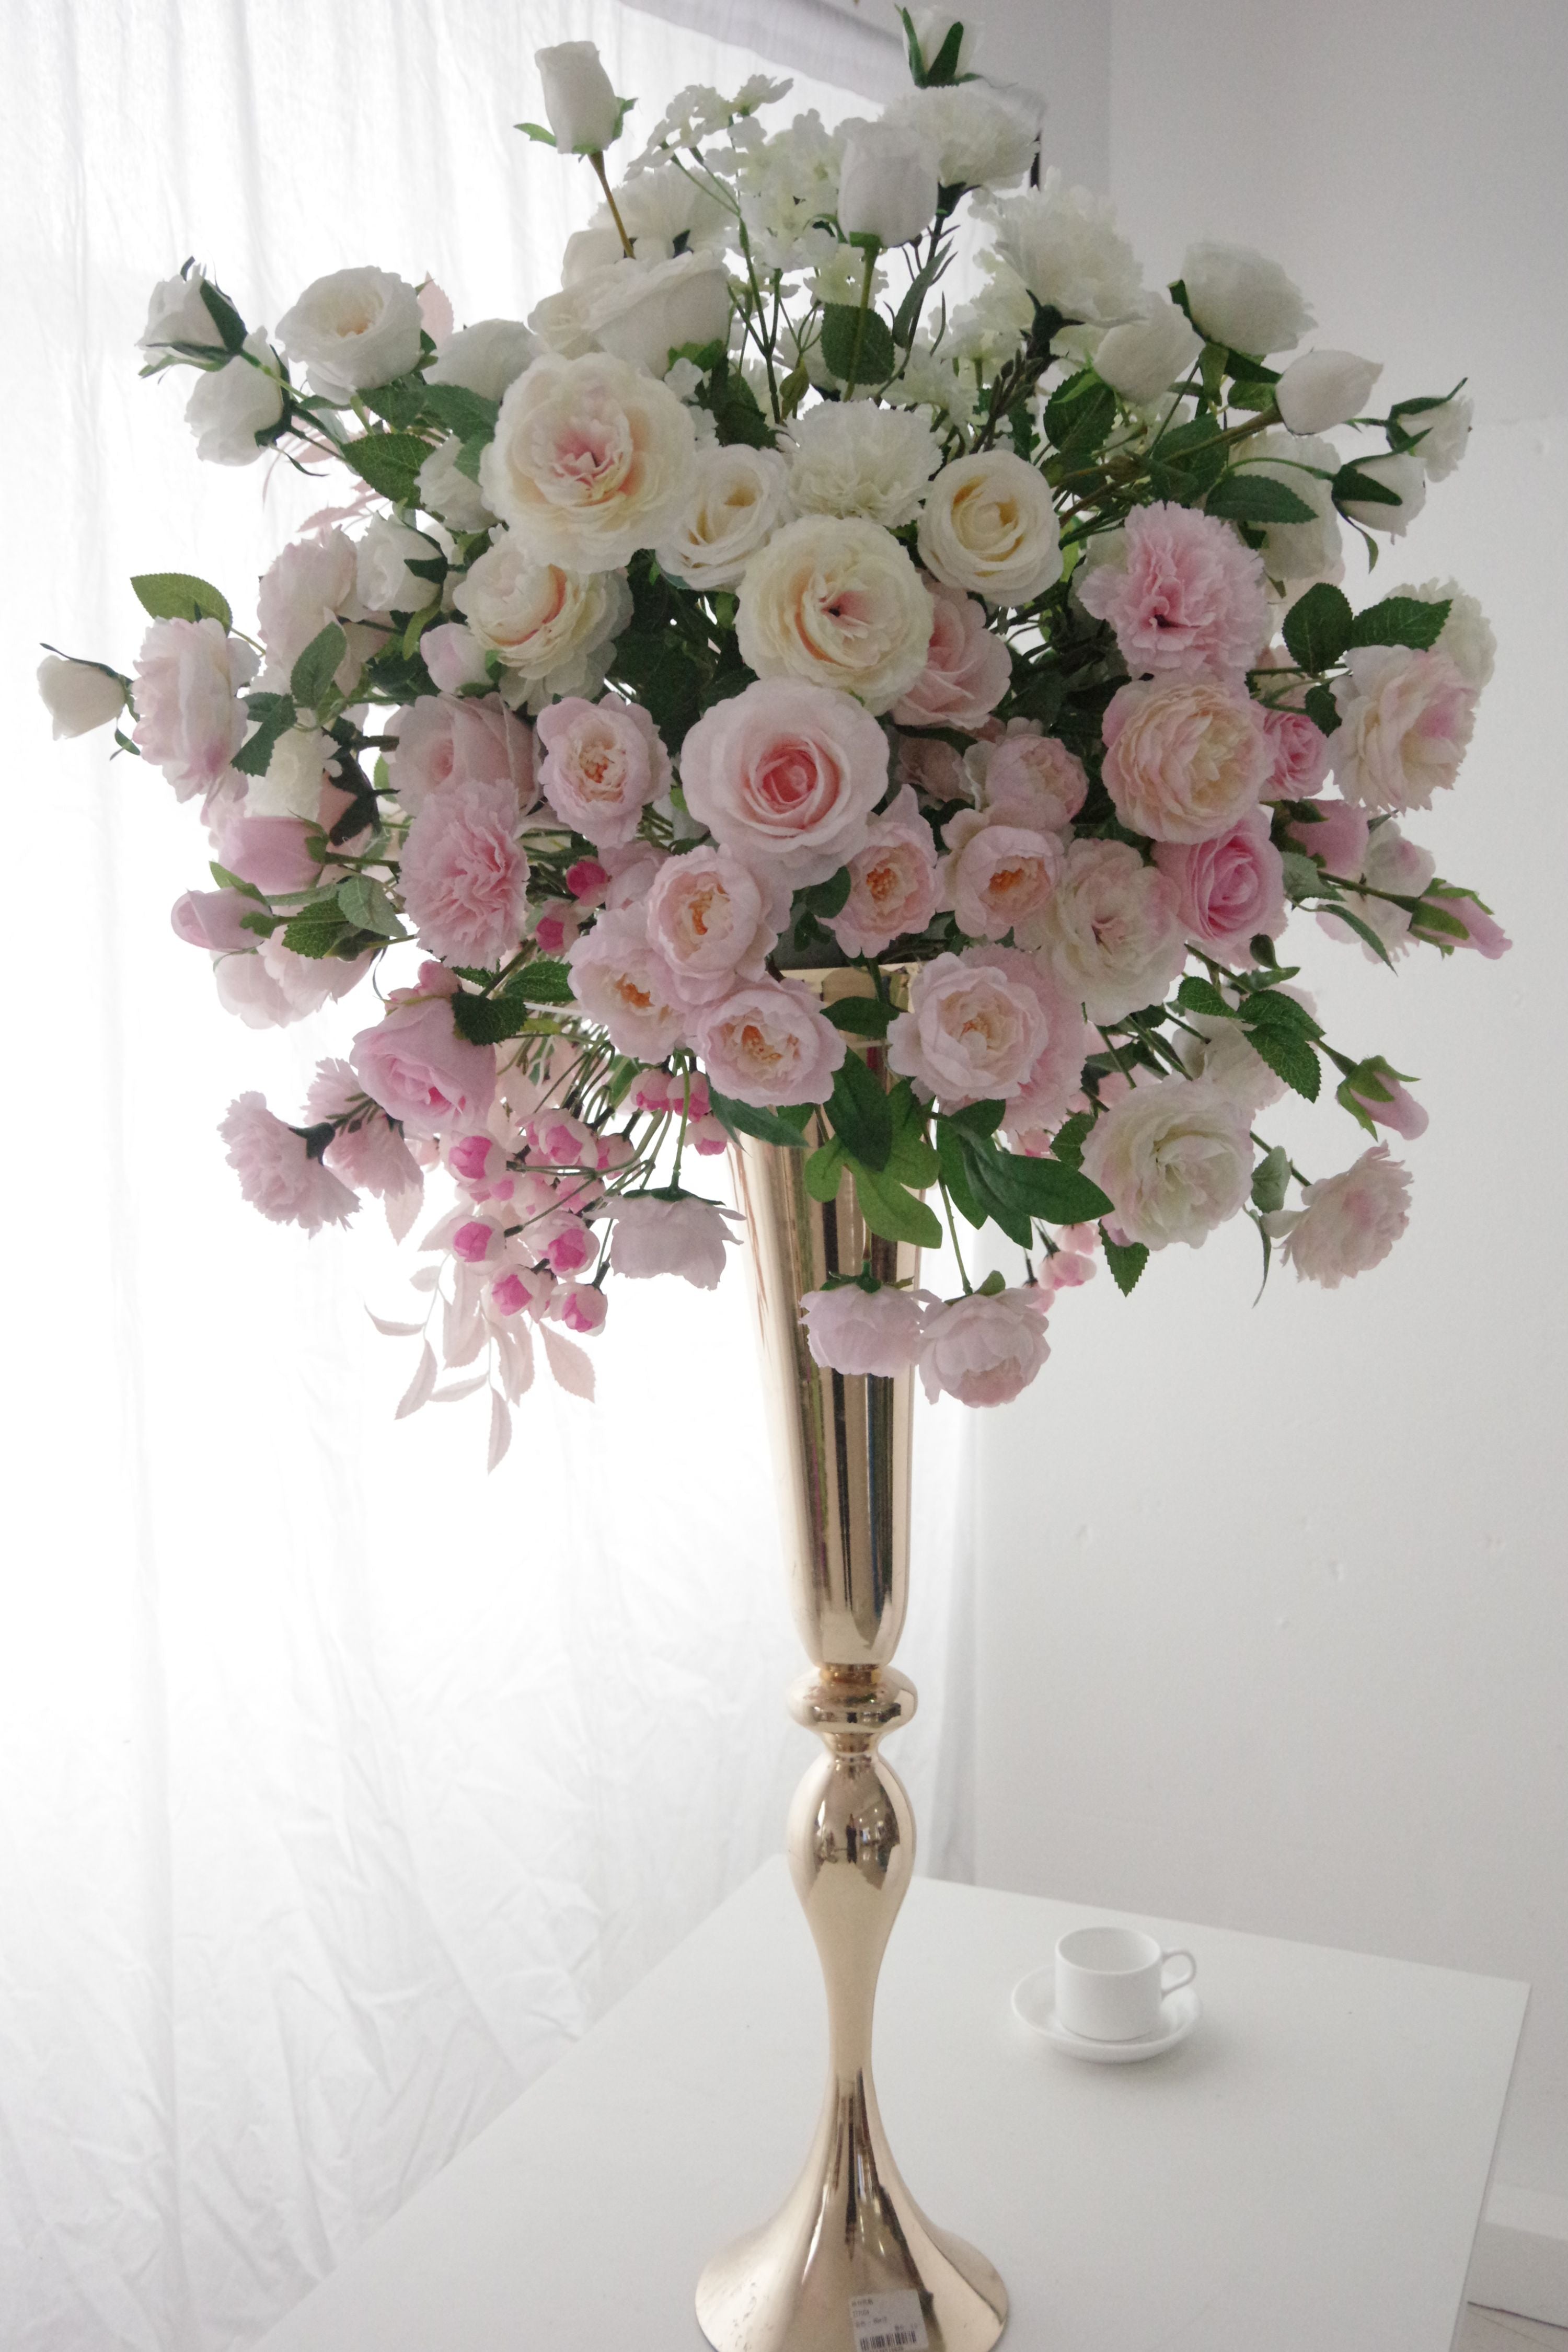 Elegant Whispers - Delicate Array of Pink Roses Amidst a Veil of White Blooms FB-060